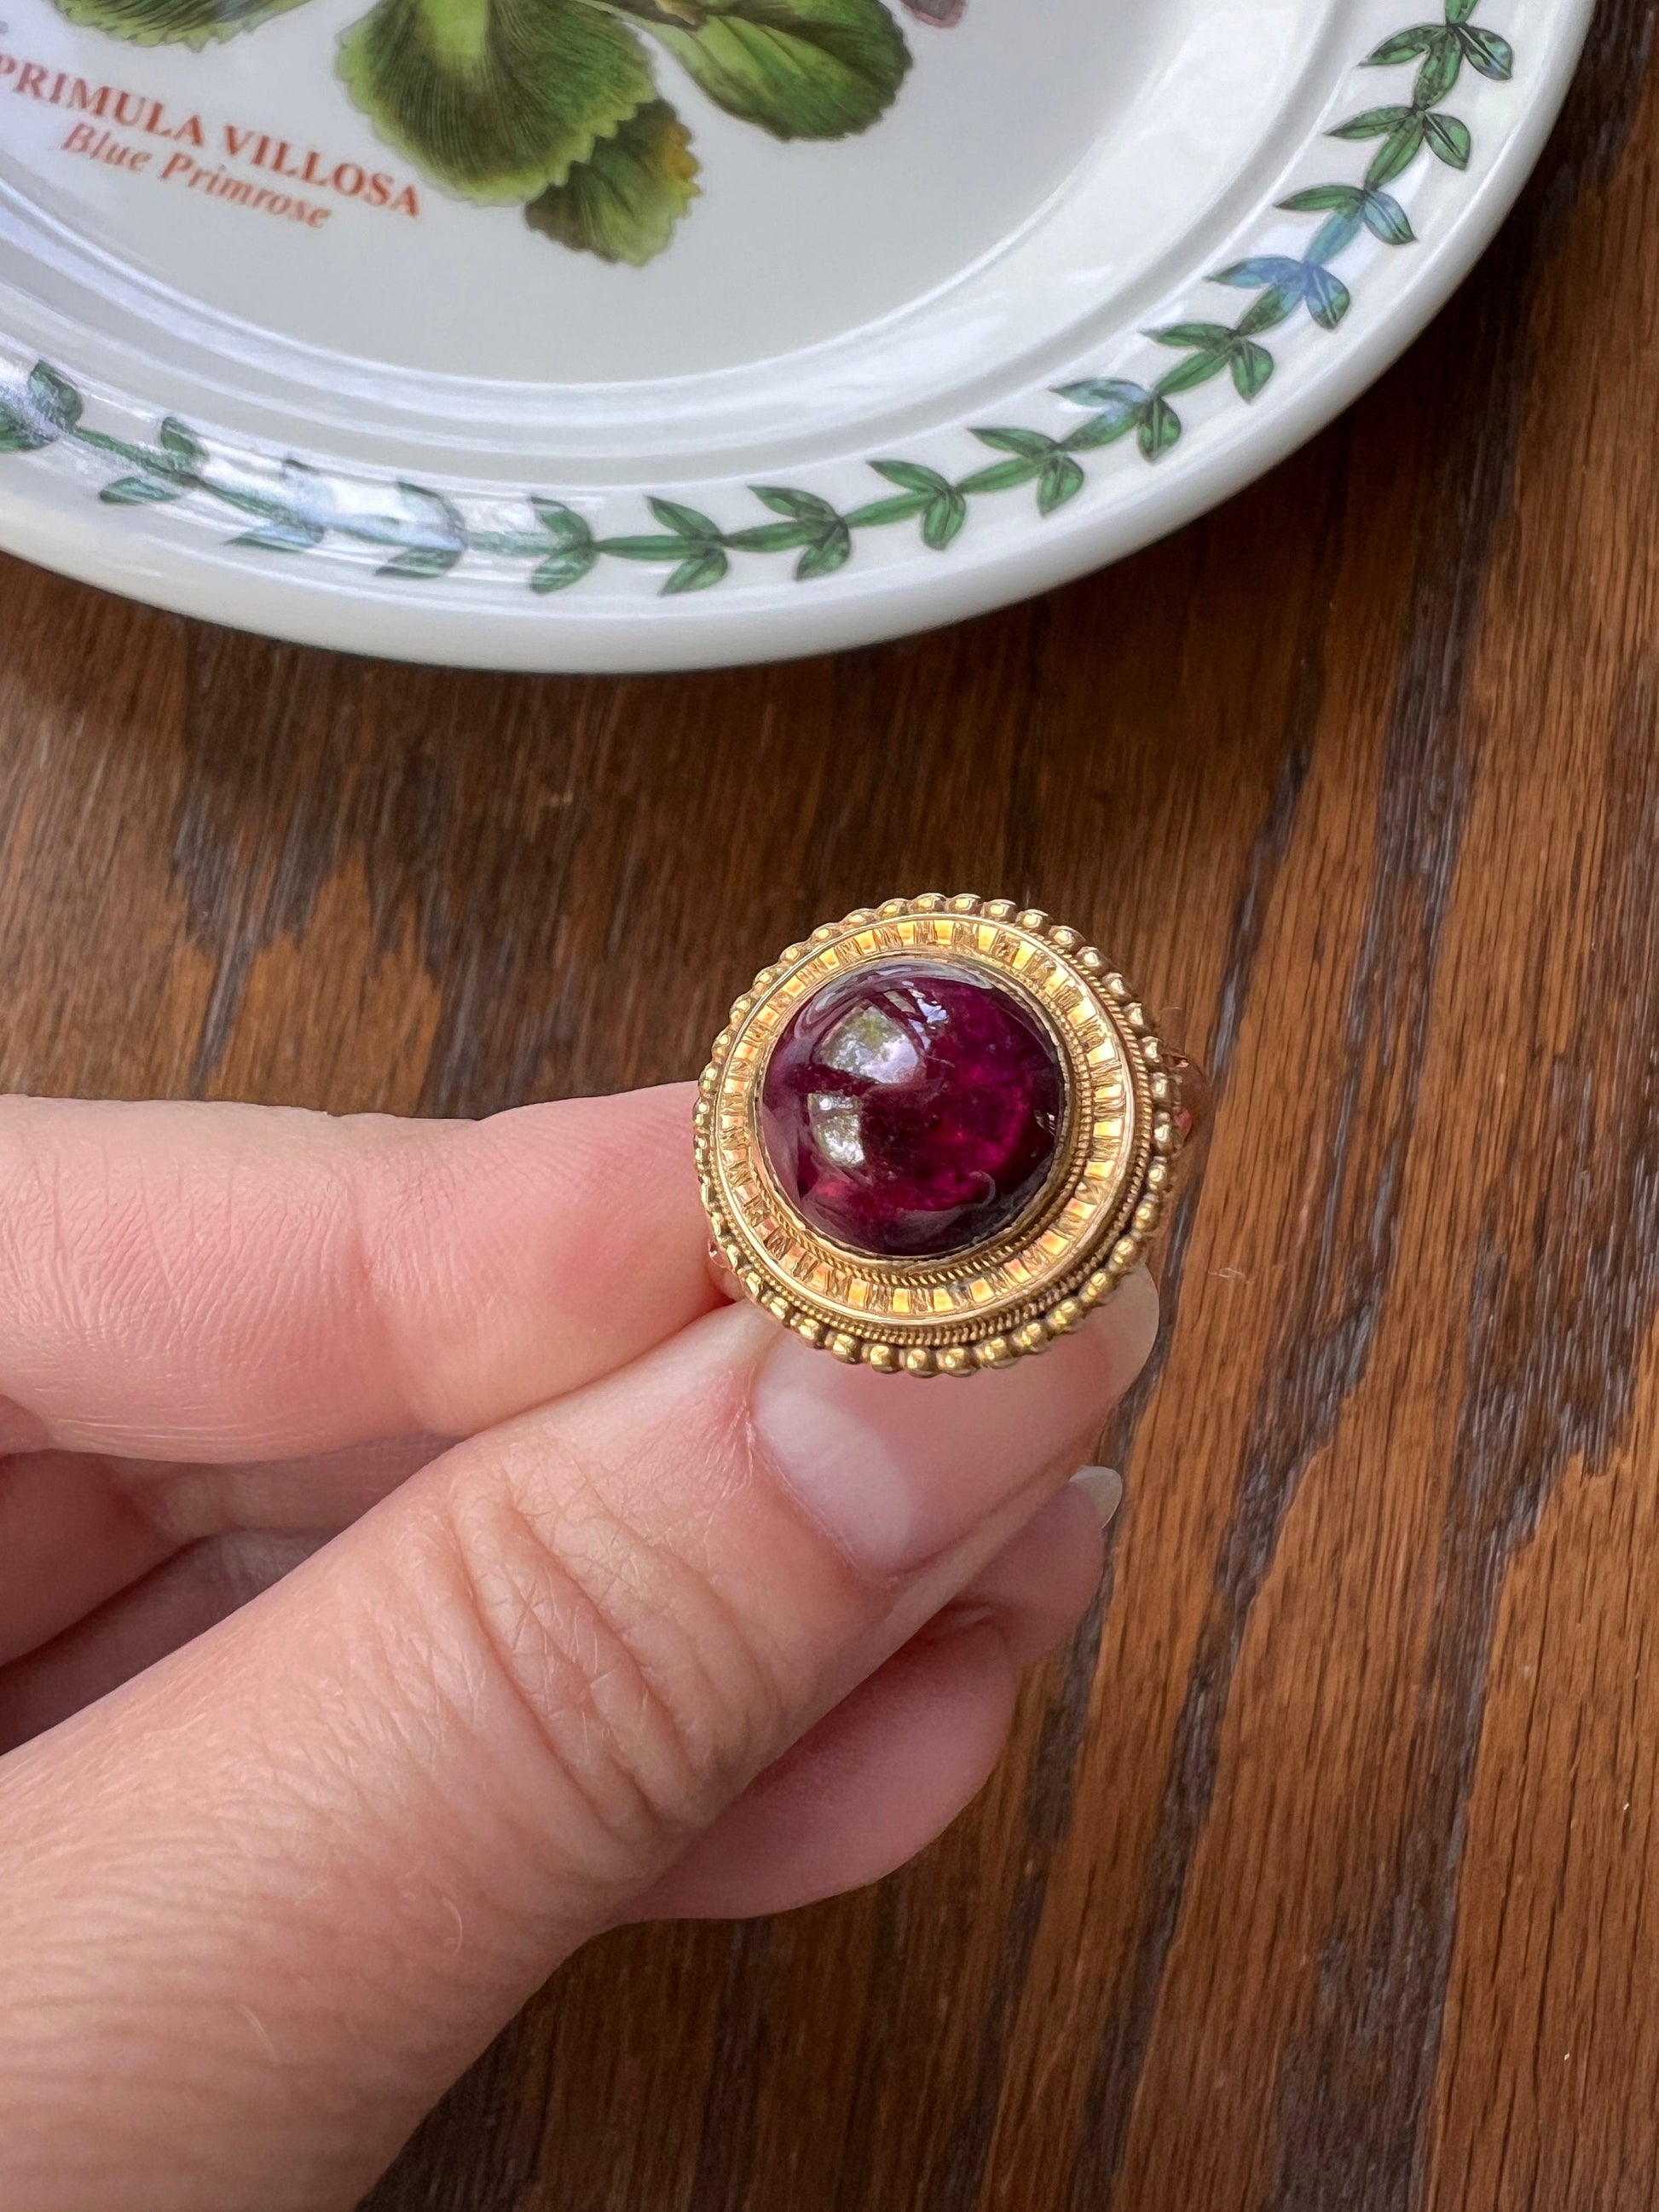 ANTIQUE Victorian Etruscan Revival GARNET Carbuncle Ring Engraved Halo 14k Gold Domed Purple Red Glow Chunky Ball Rivet Halo Romantic Gift